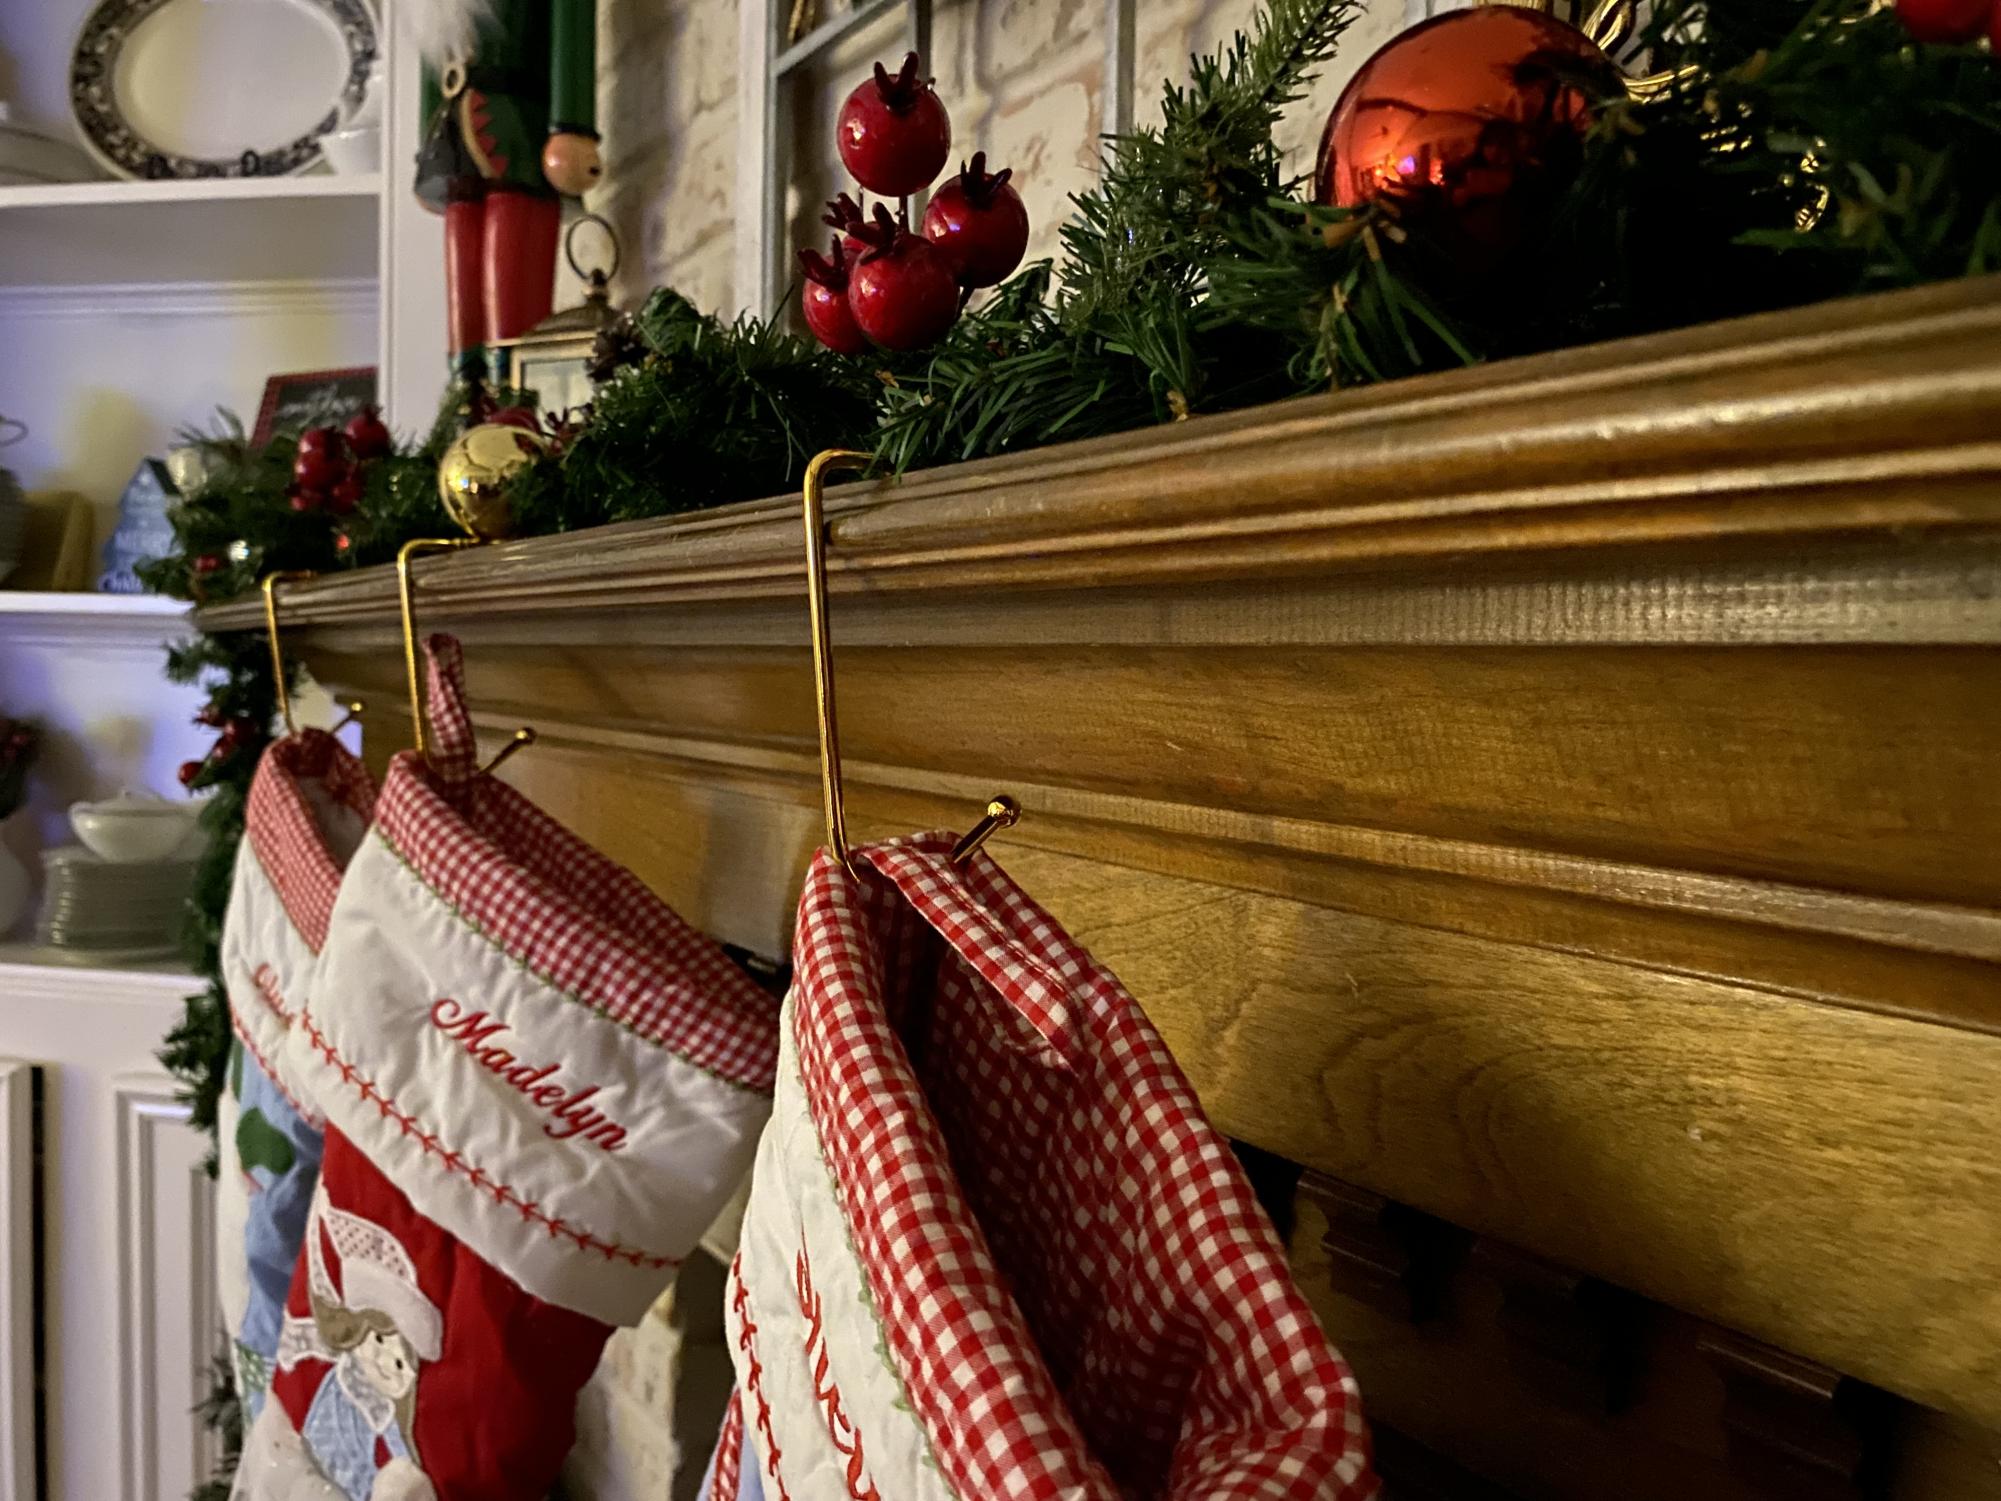 The stockings hang on a mantle as families prepare for the holidays.